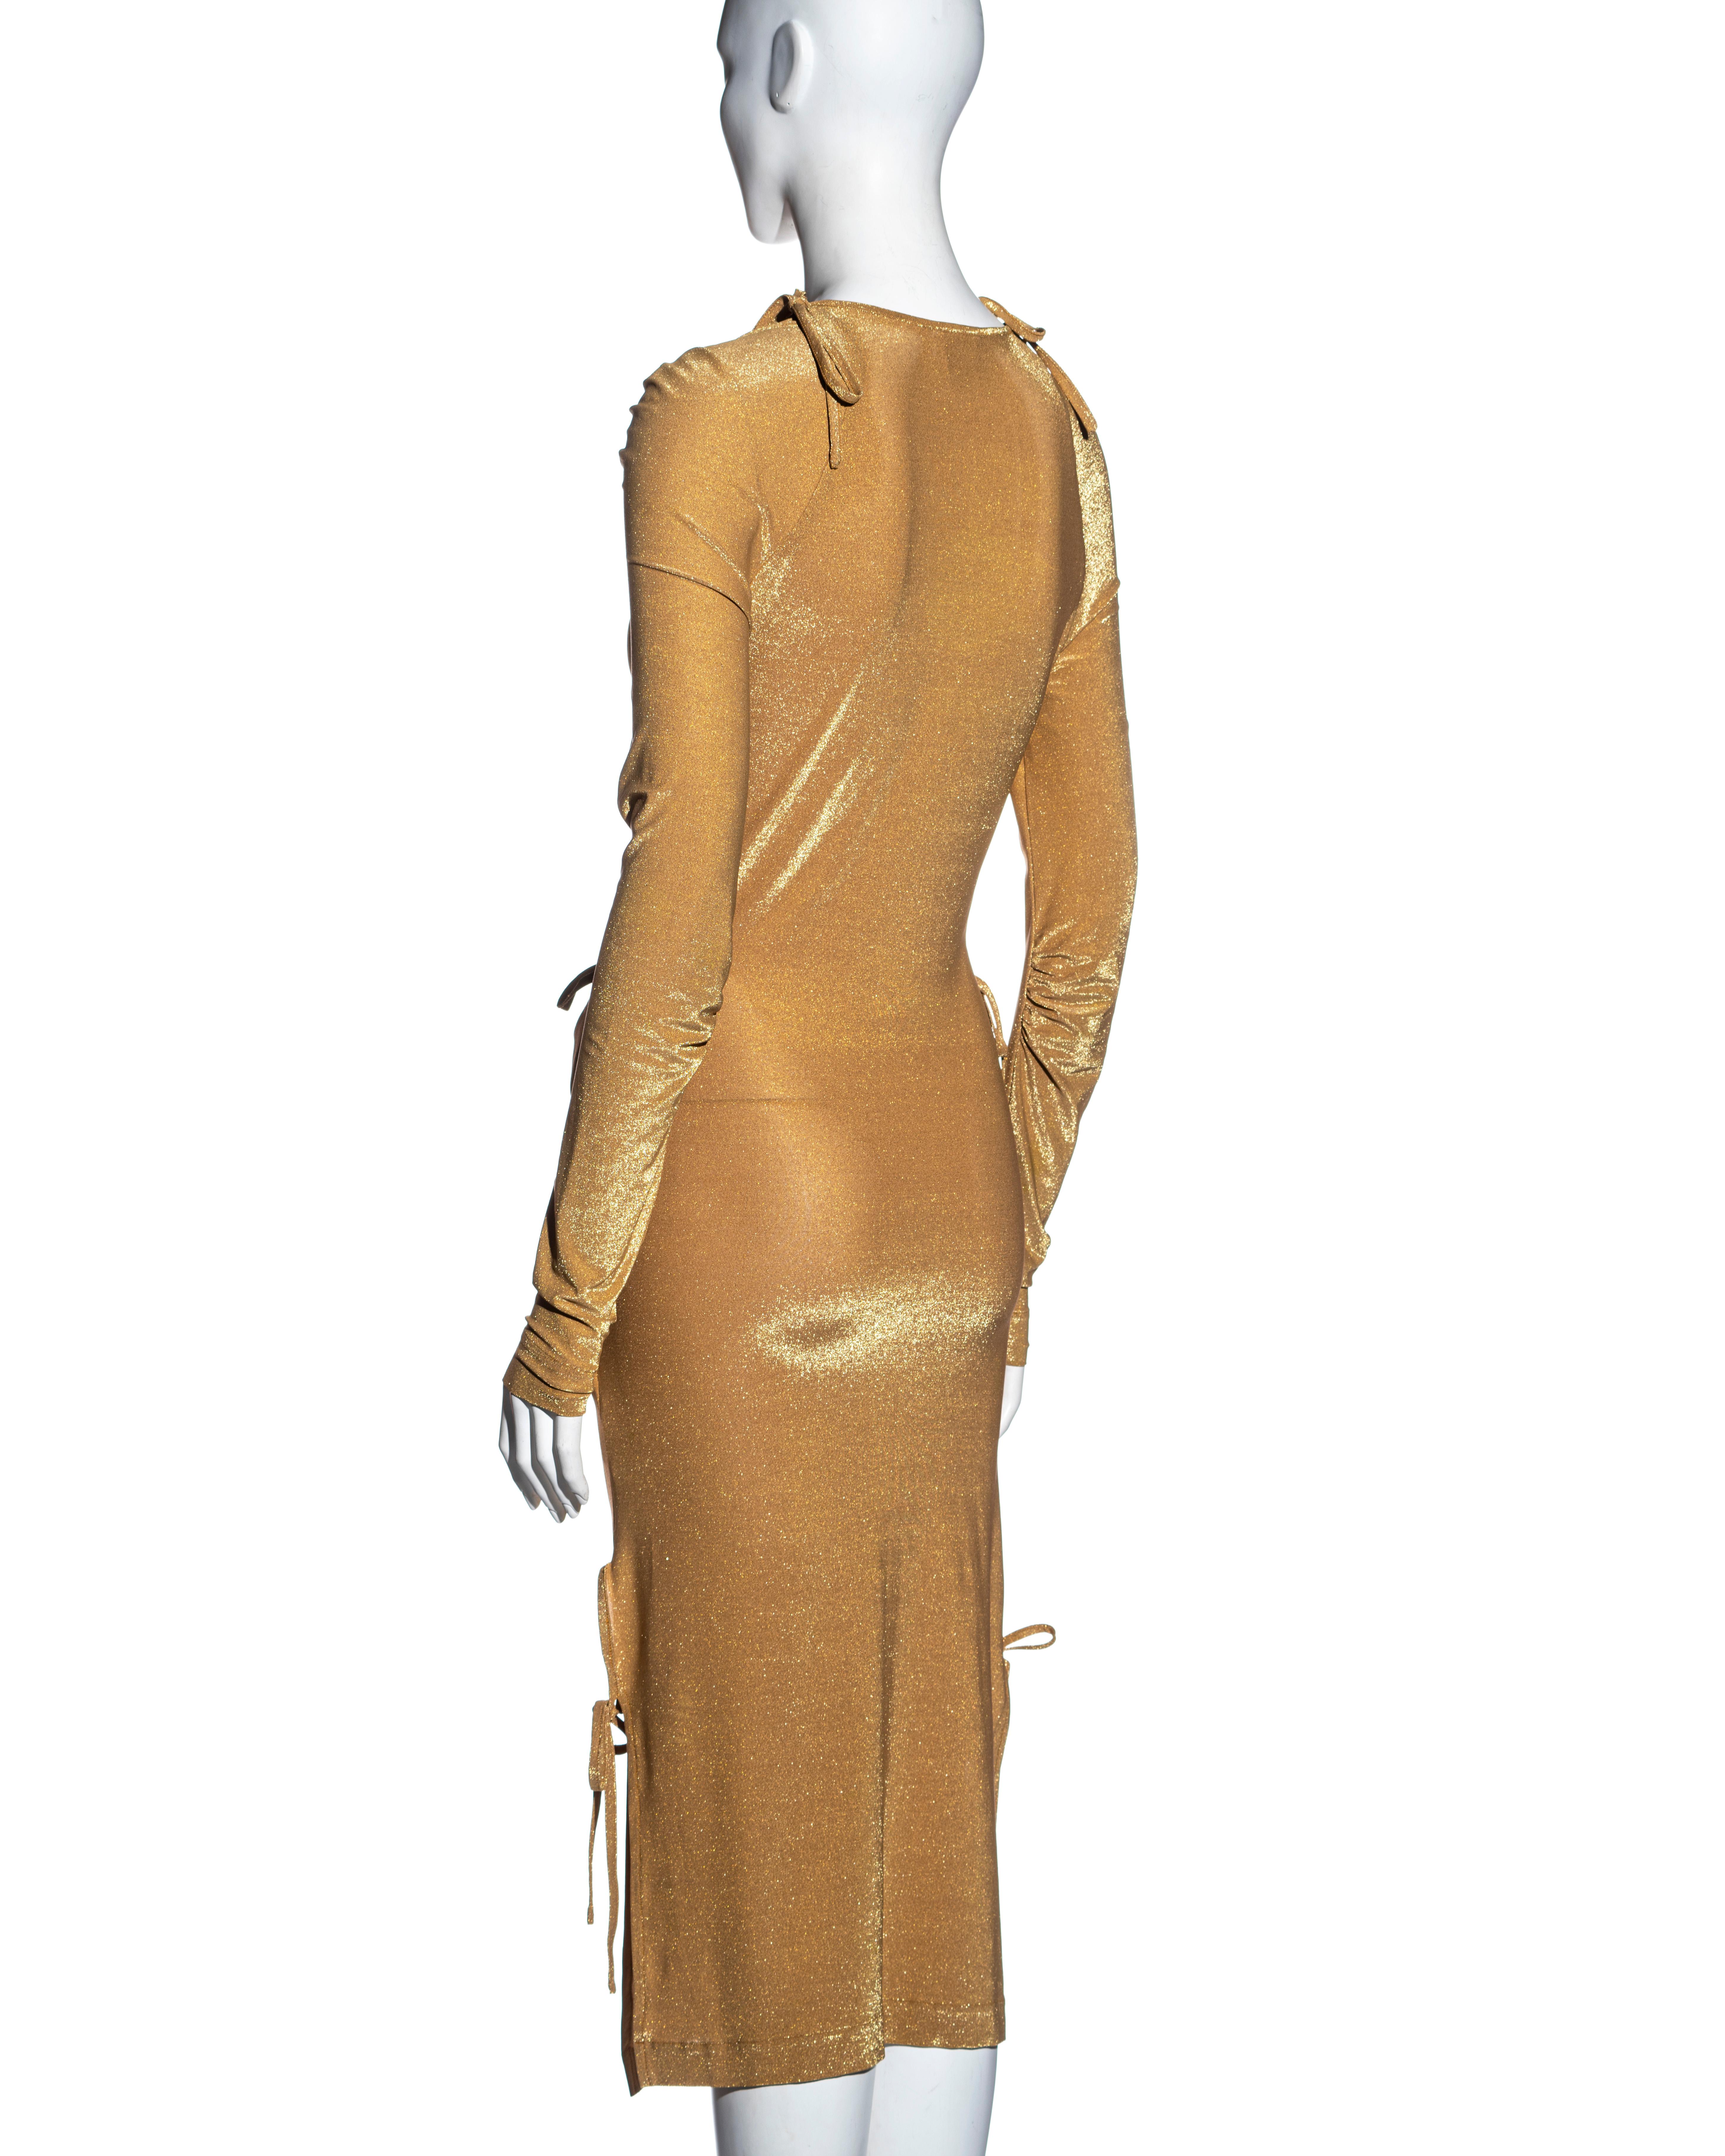 Vivienne Westwood gold stretch lurex evening dress with cut outs, fw 1997 8